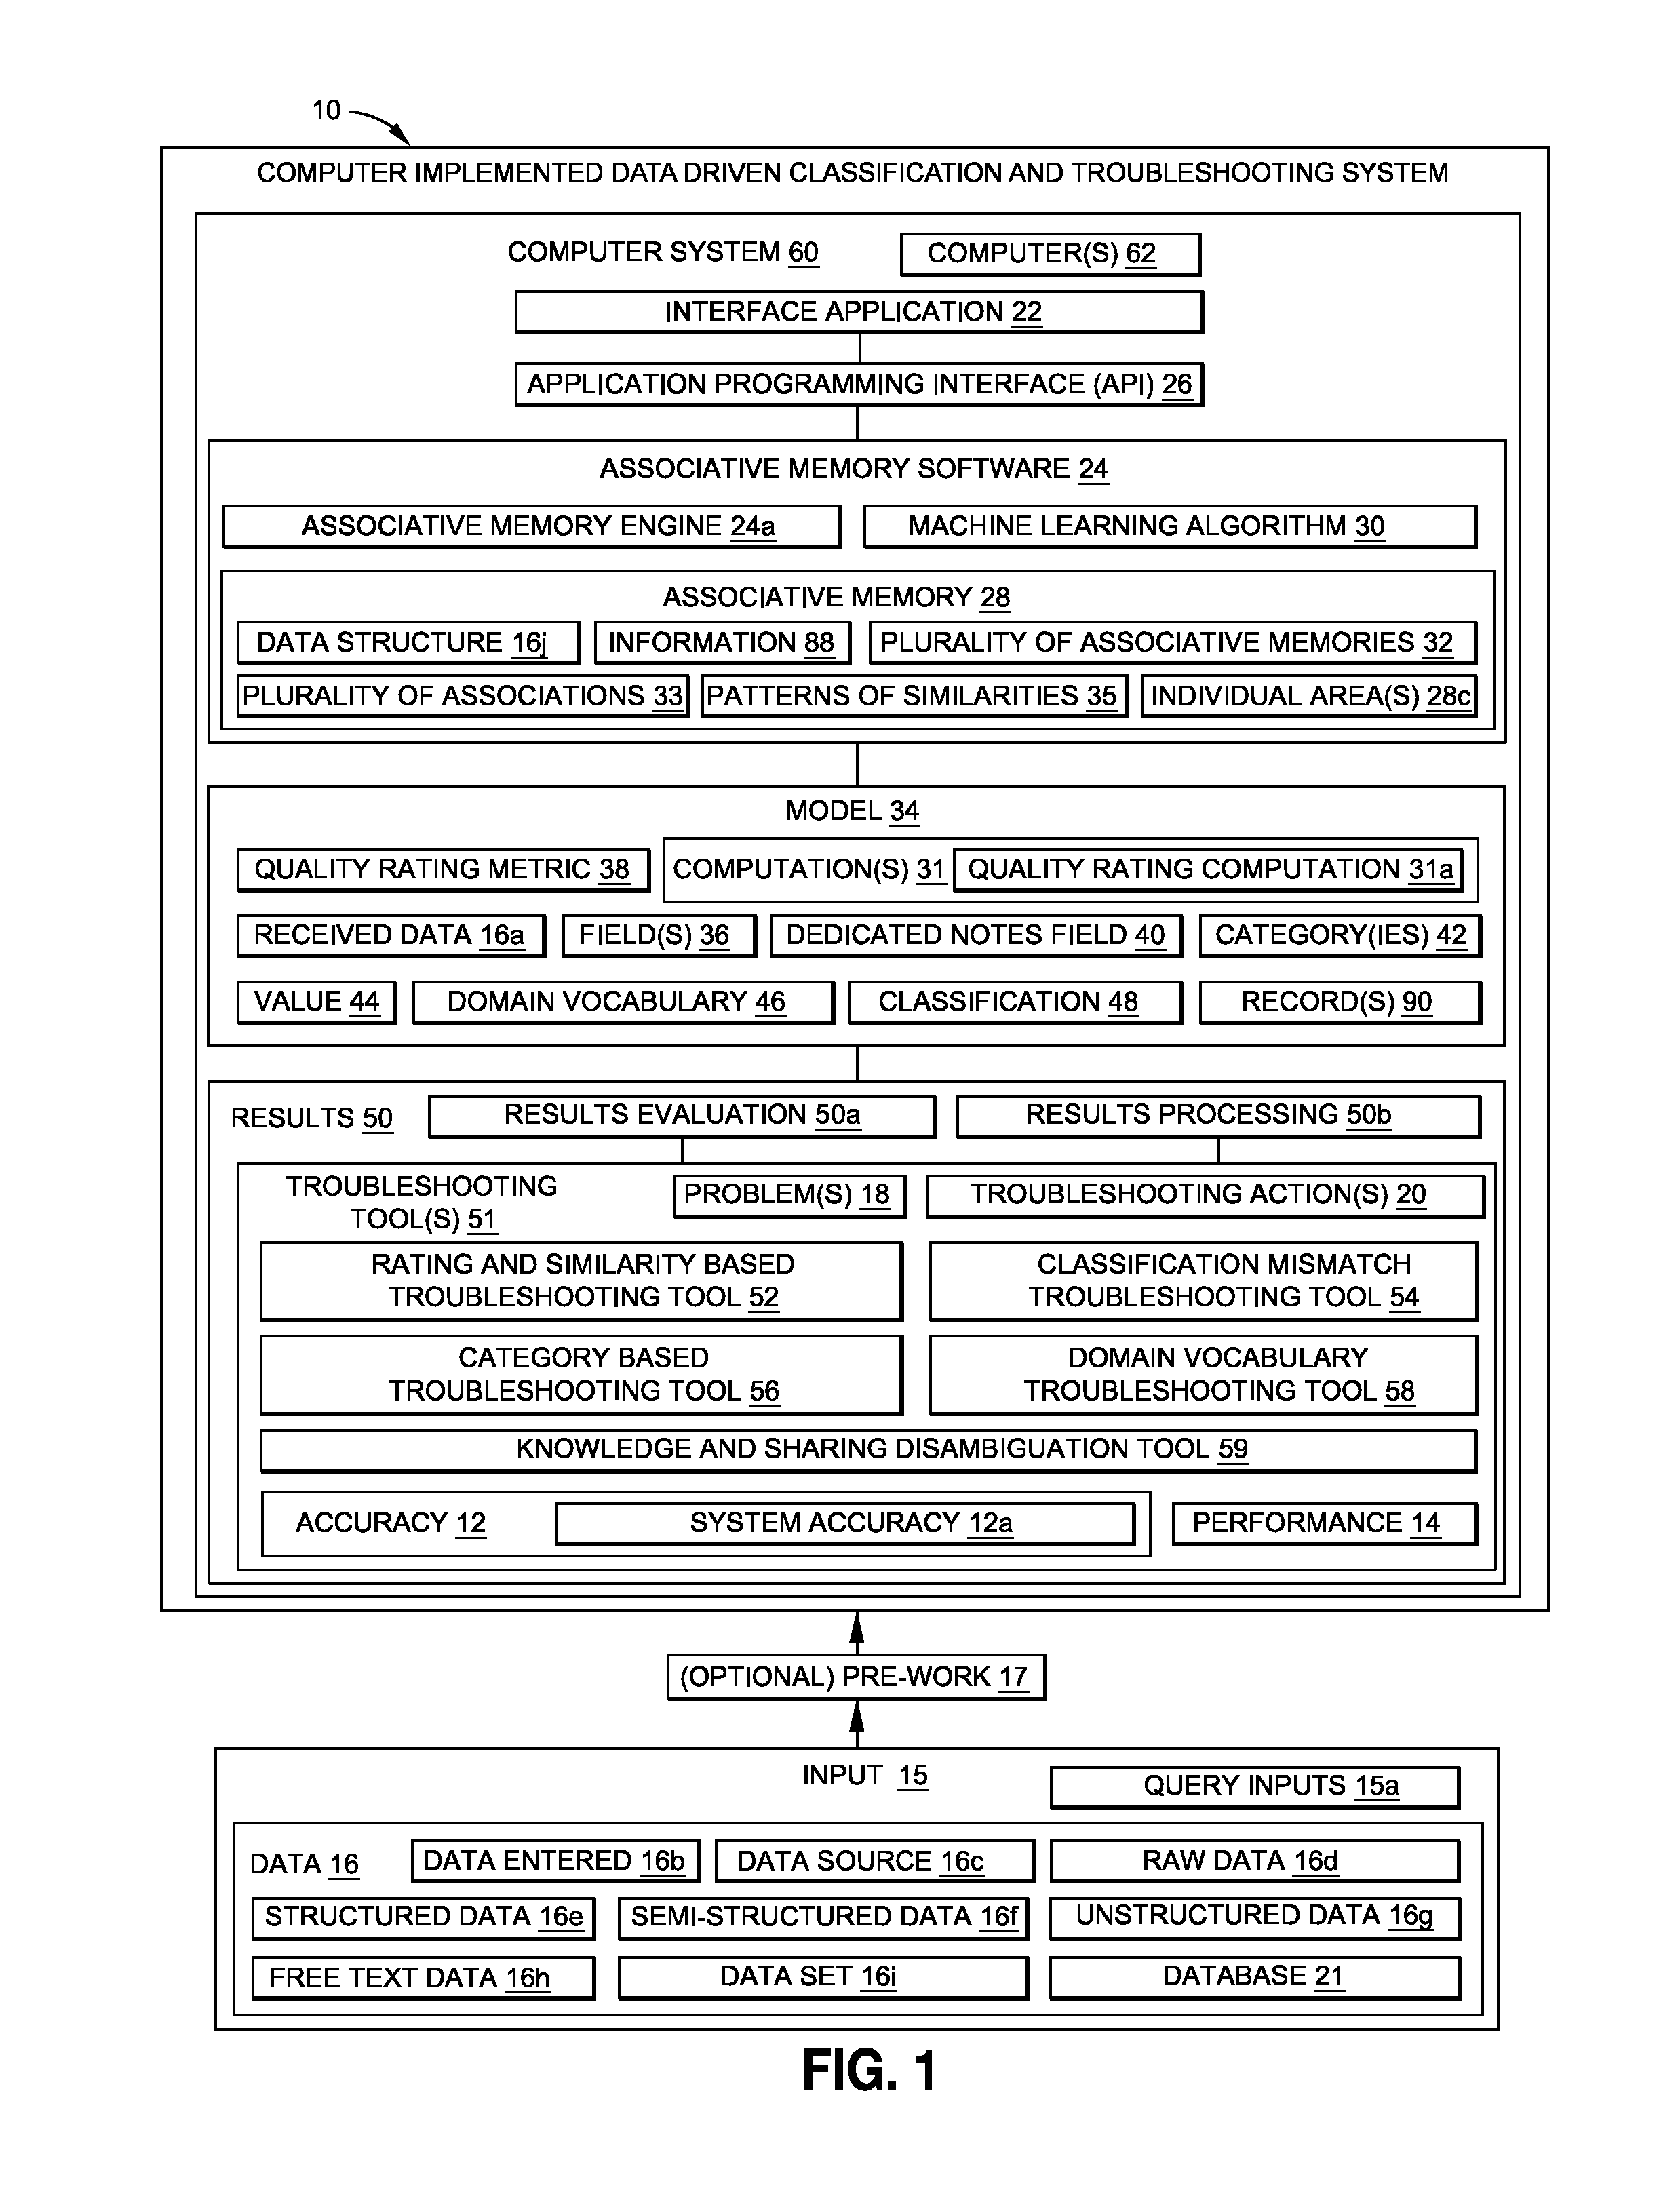 Data driven classification and troubleshooting system and method